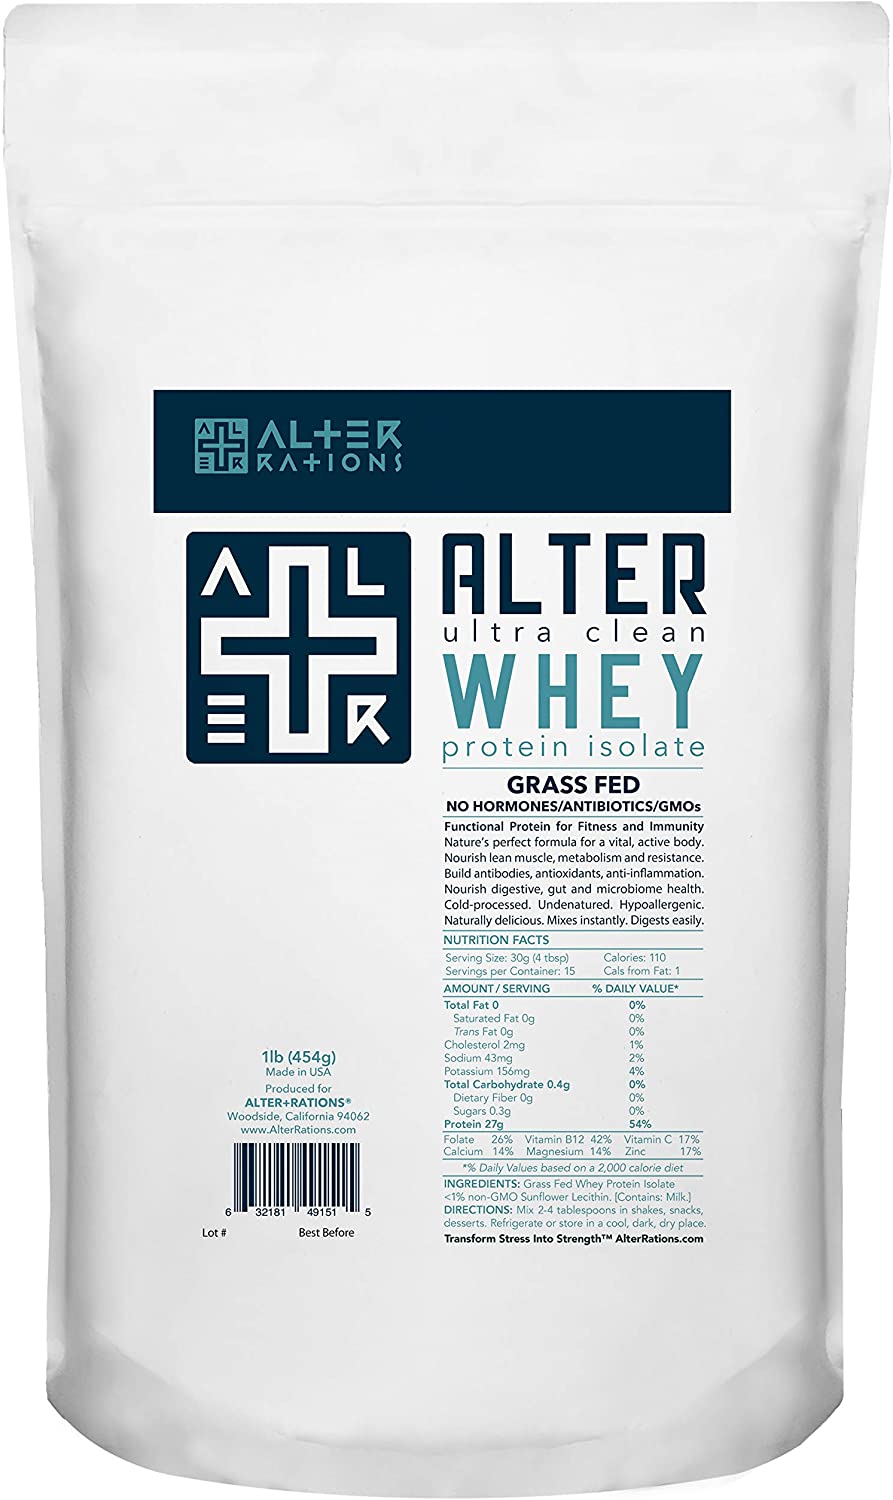 Alter Ultra Clean Whey Protein Isolate